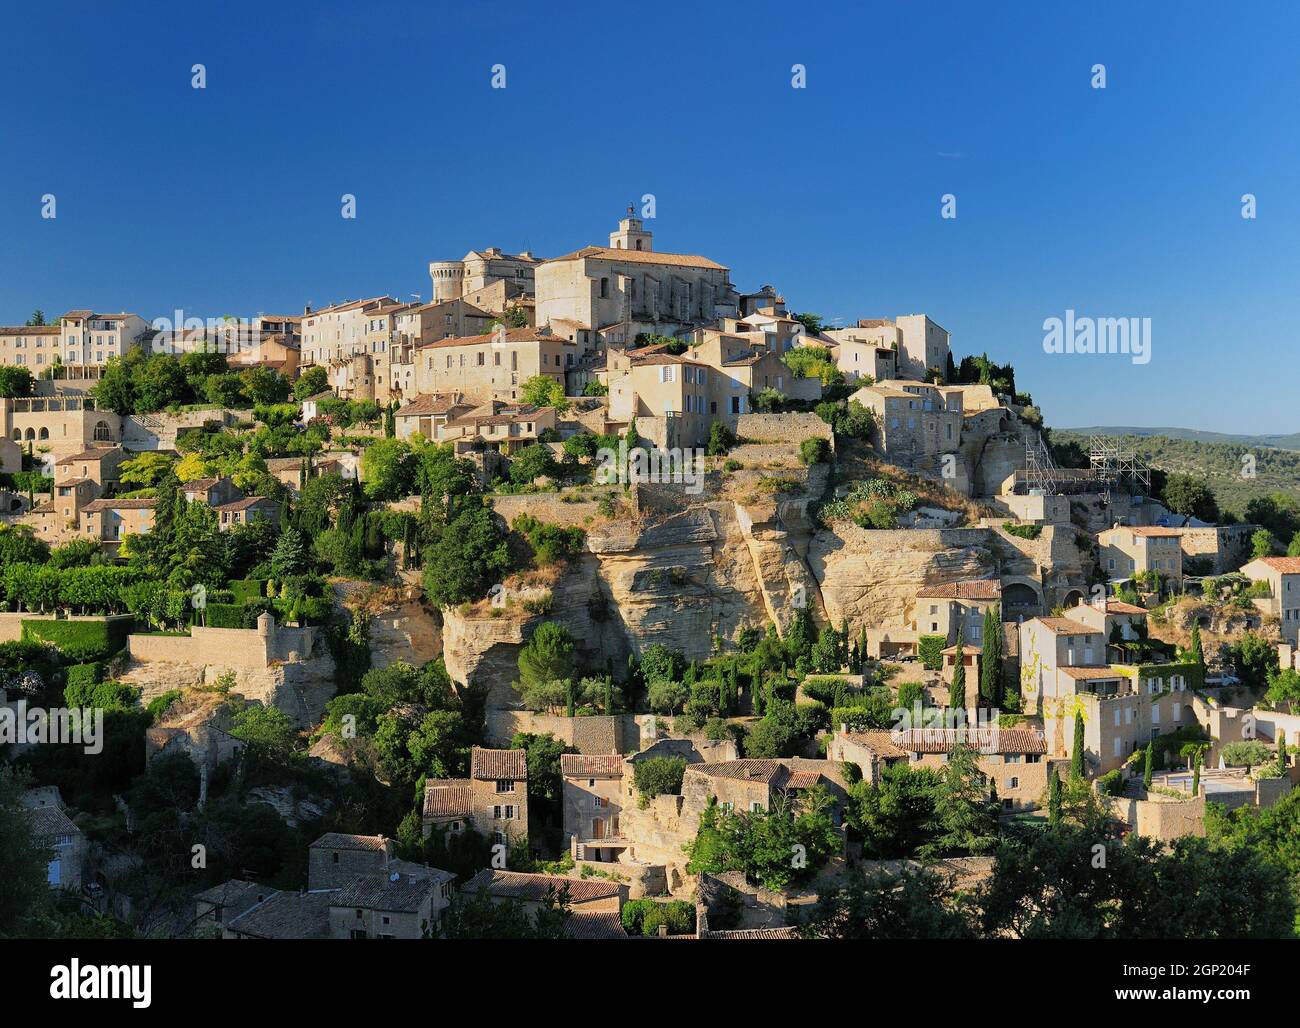 Historic Mountain Village Gordes In Provence France On A Beautiful Summer Day With A Clear Blue Sky Stock Photo